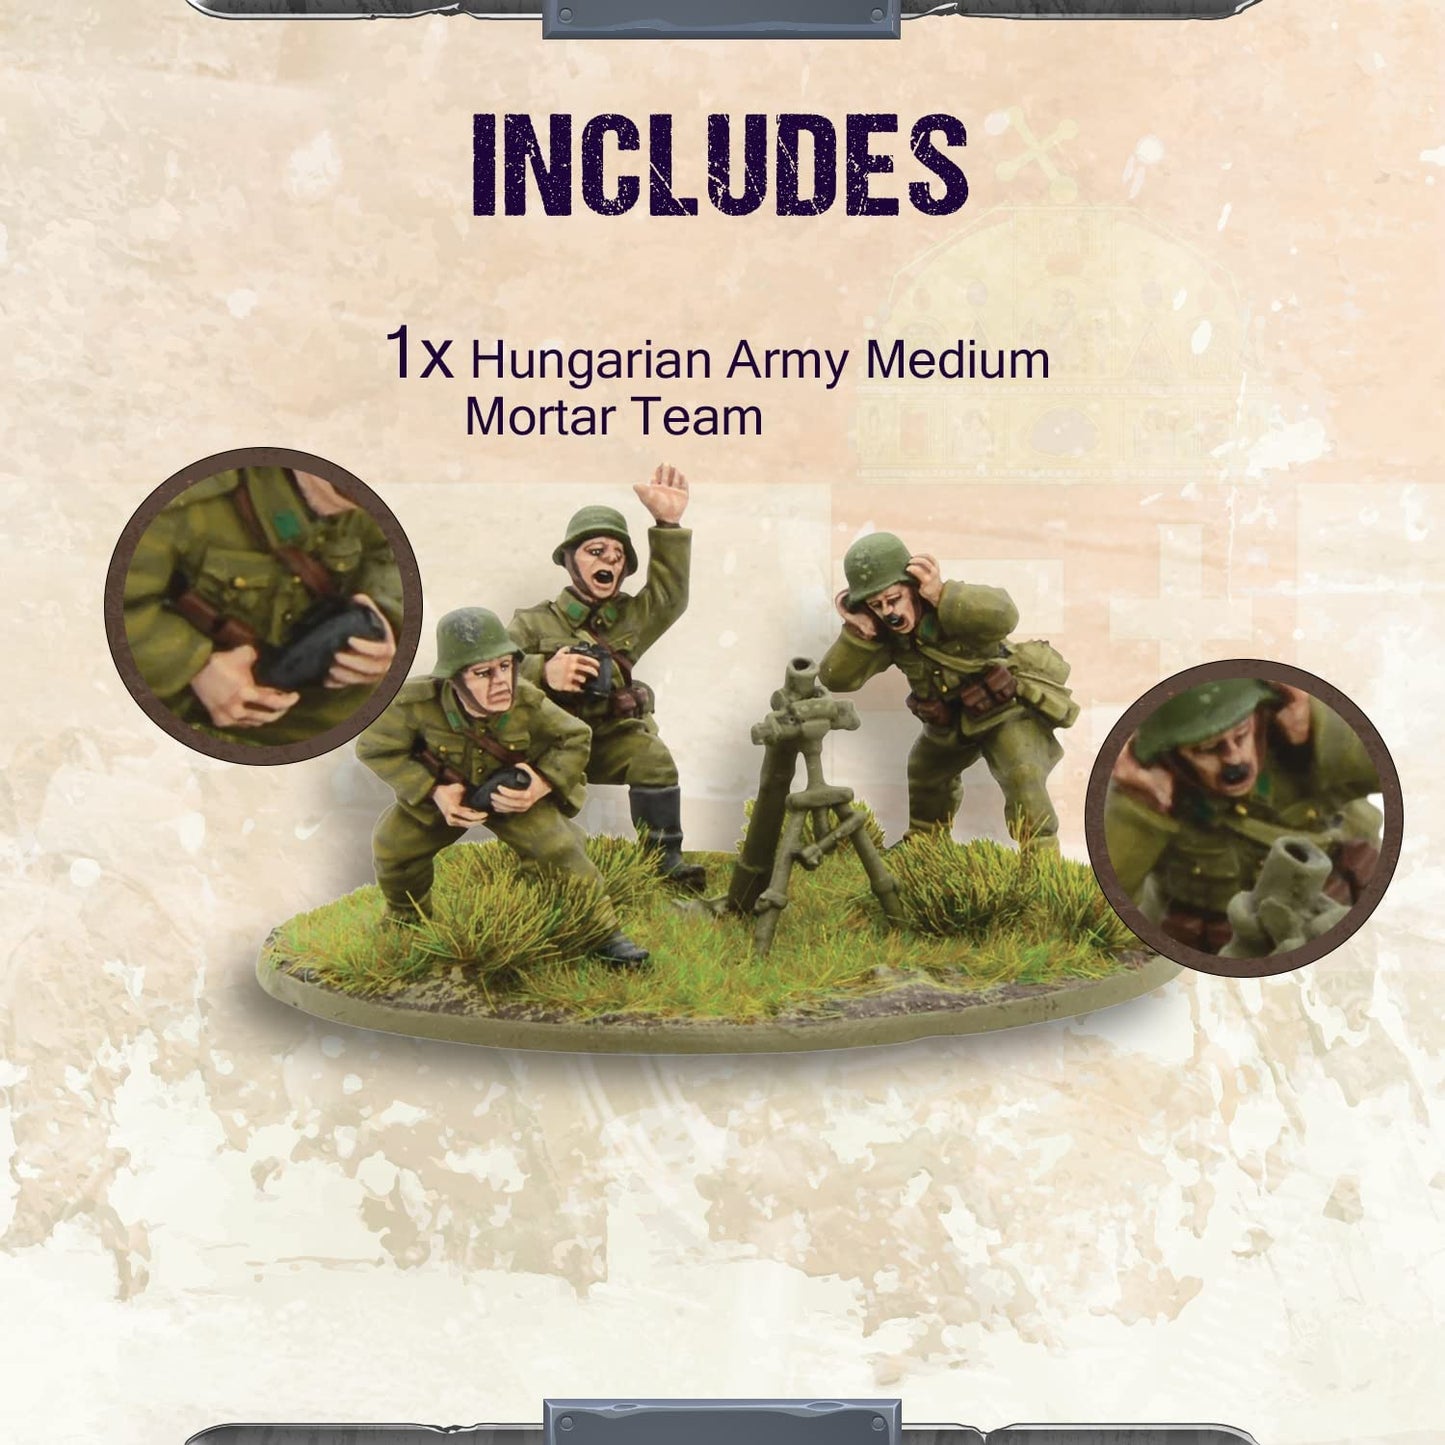 Bolt Action - More Axis: Hungarian Army Support Group